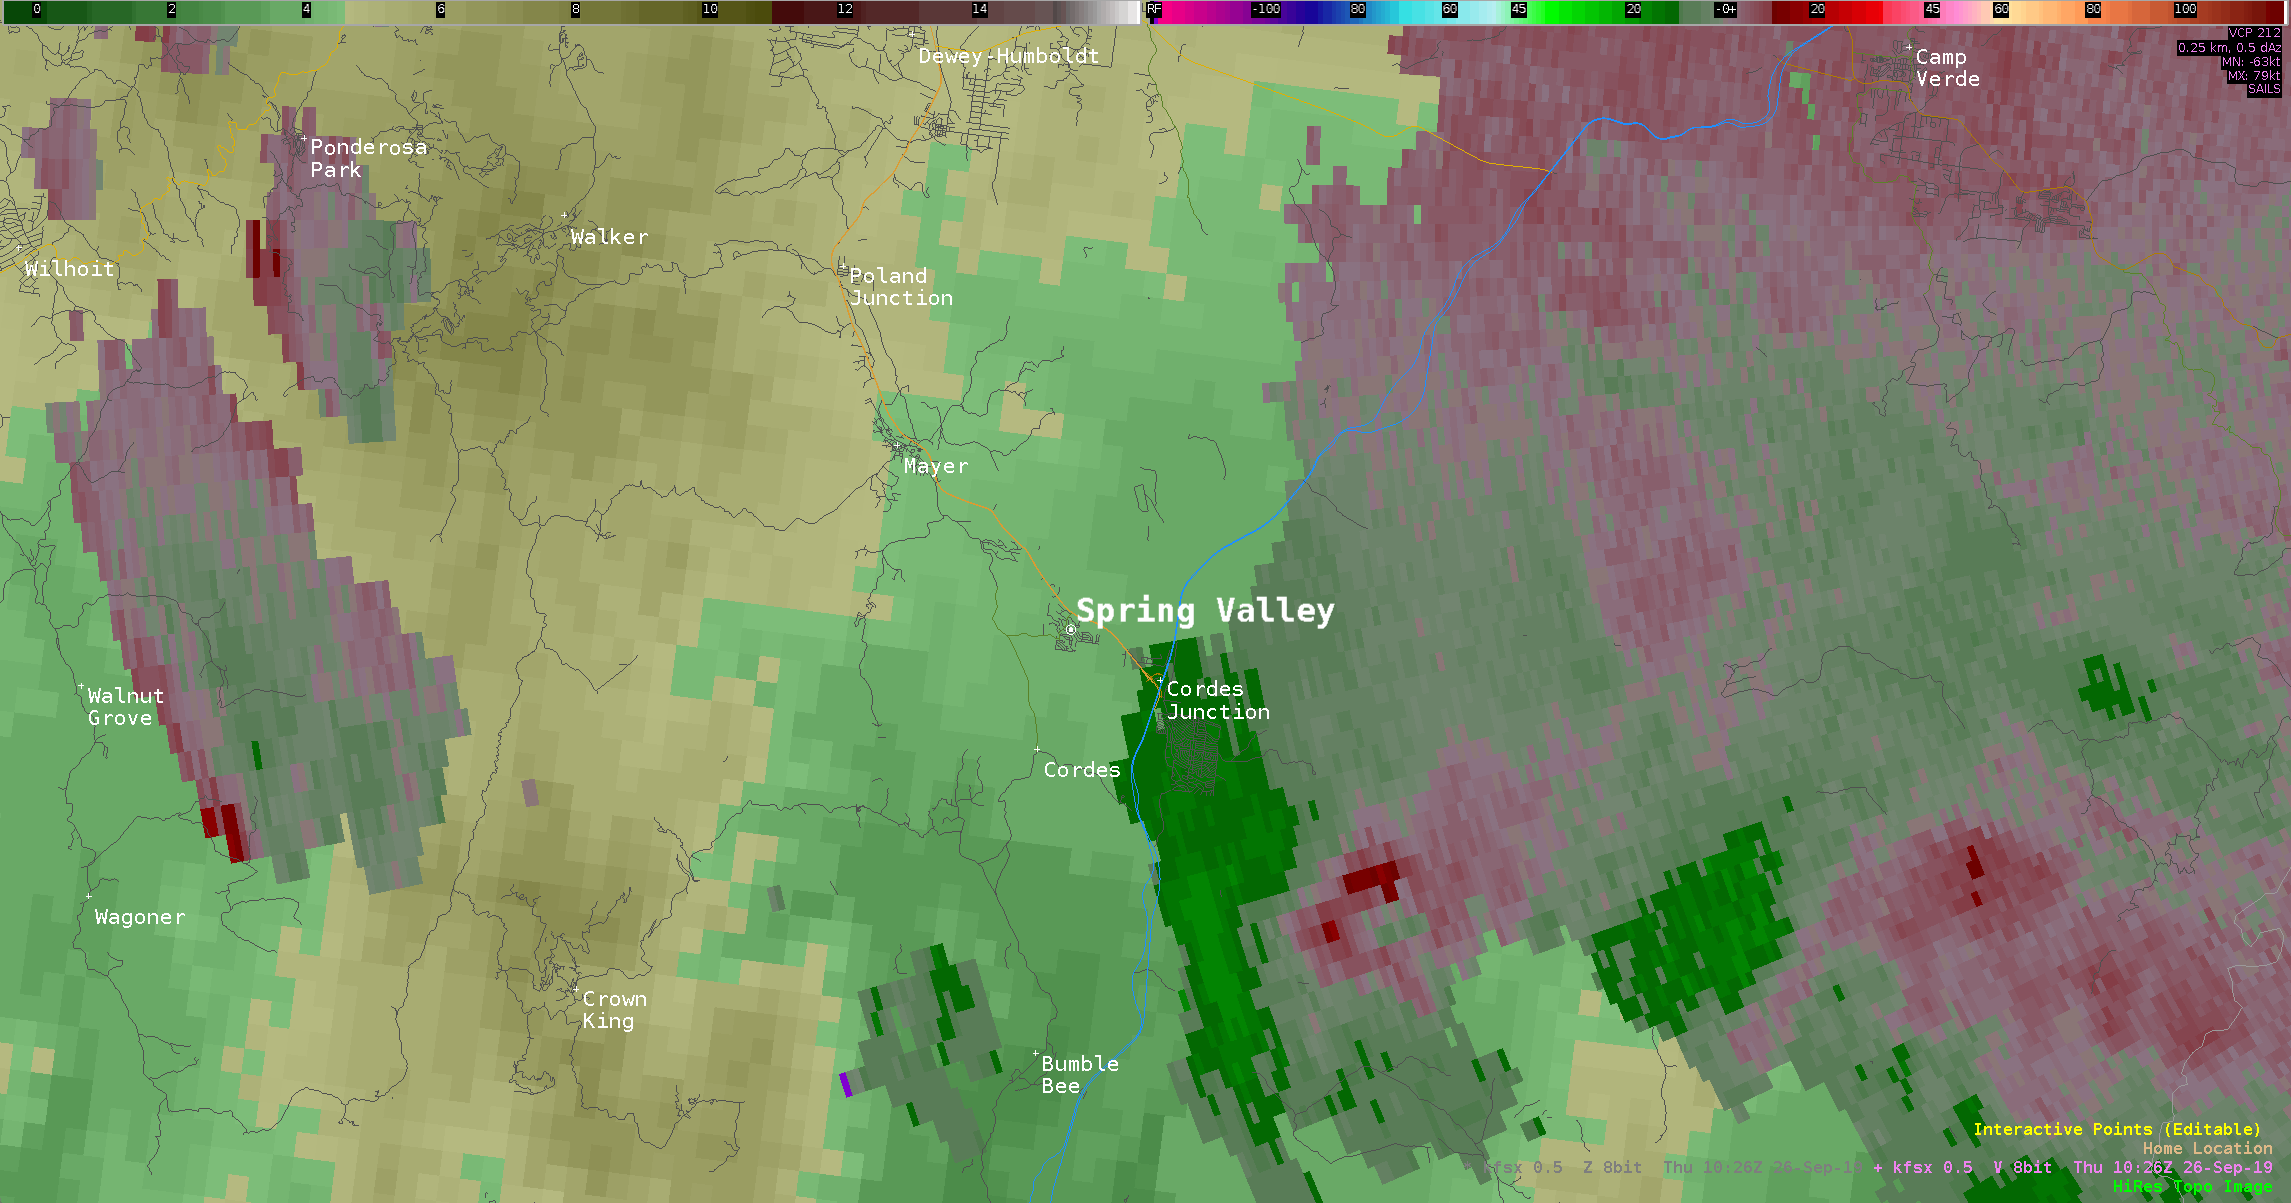 Radar velocity of the storm as it moved through Spring Valley